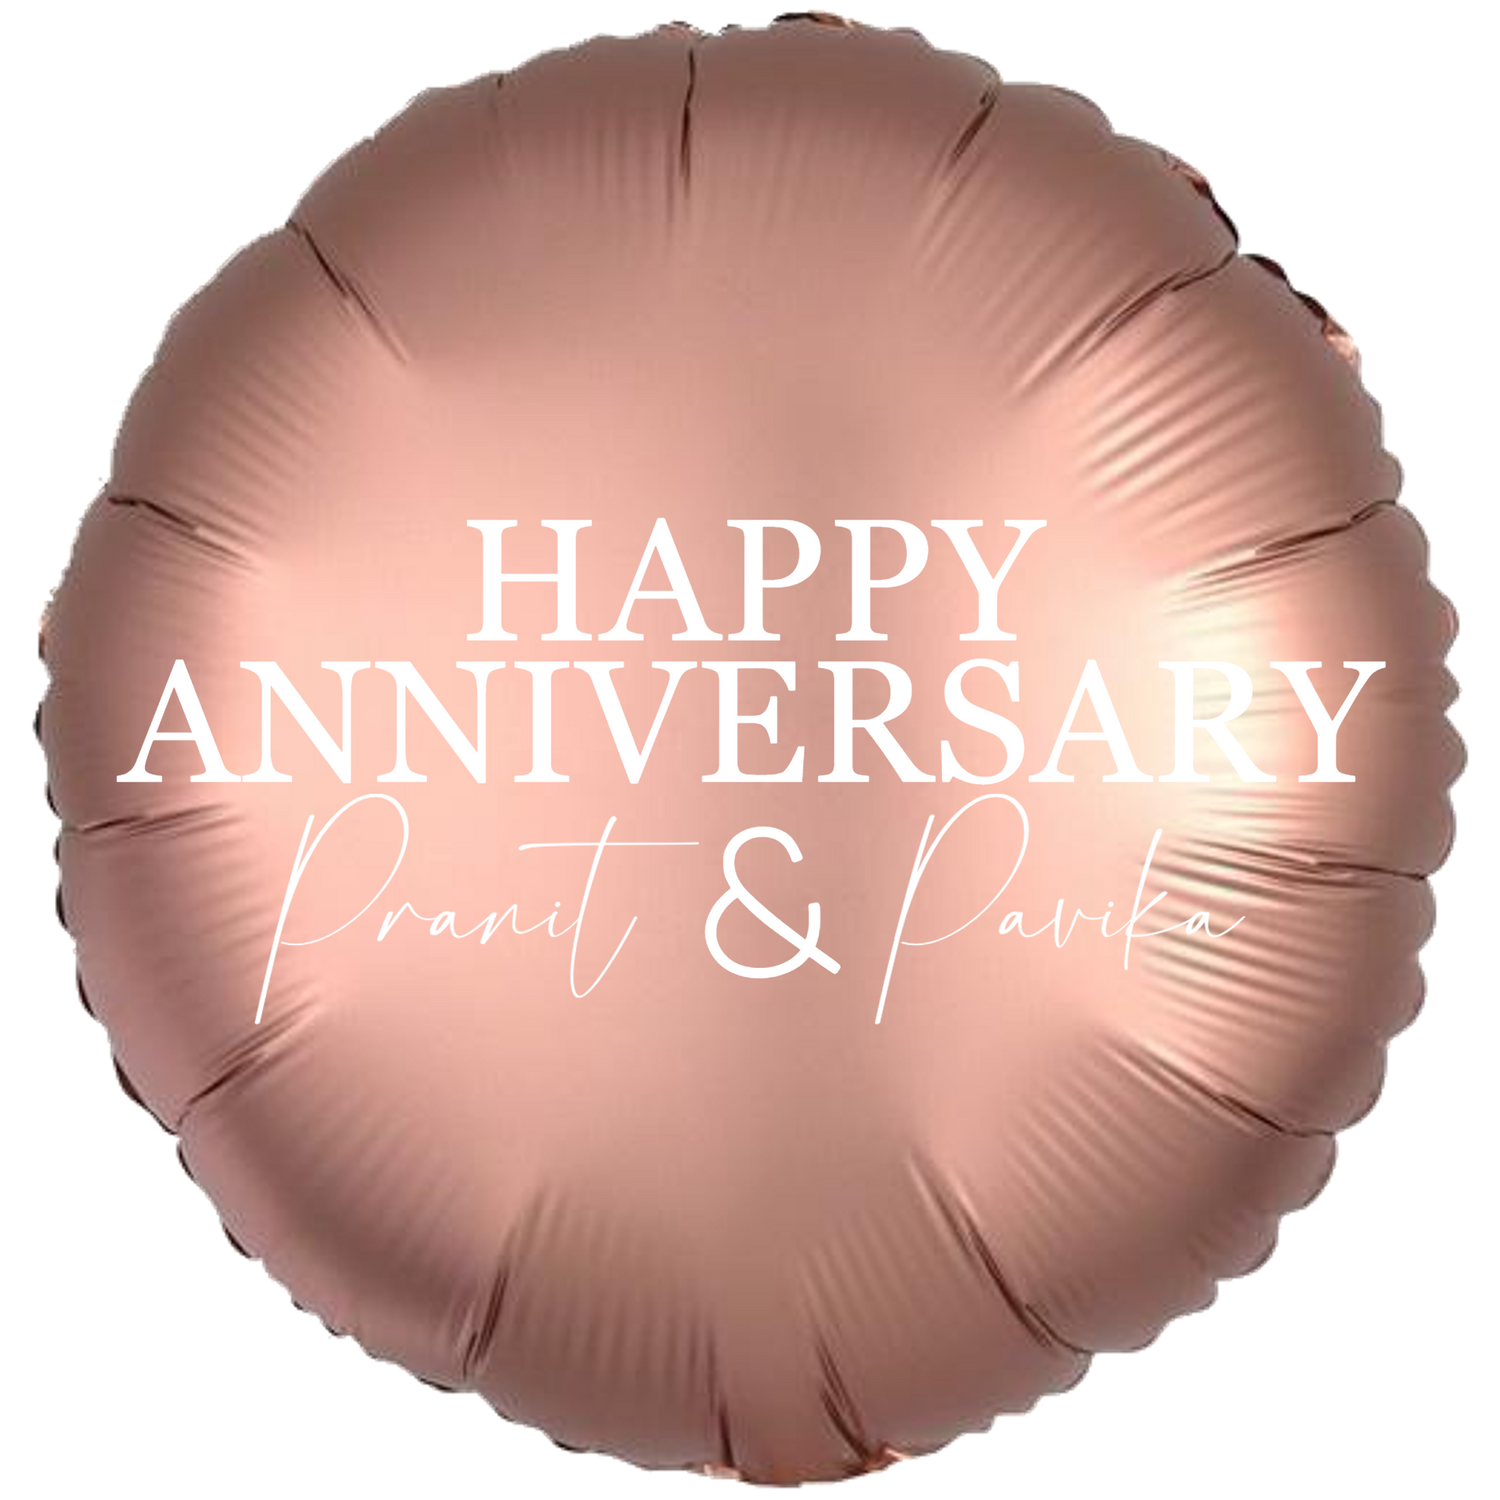 Custom Name/Text/Message Rose Gold Round Balloons For First Wedding Anniversary, 2nd/3rd/5th/10th/15th/20th/25th/30th/35th/40th/45th/50th/55th/60th/65th/75th Marriage Anniversary And Wedding Milestones. Supports Helium/Air, Luxury Bespoke Balloons Make Perfect Decoration Supplies & Surprise For Your Husband/Wife/Partner/Other-Half.